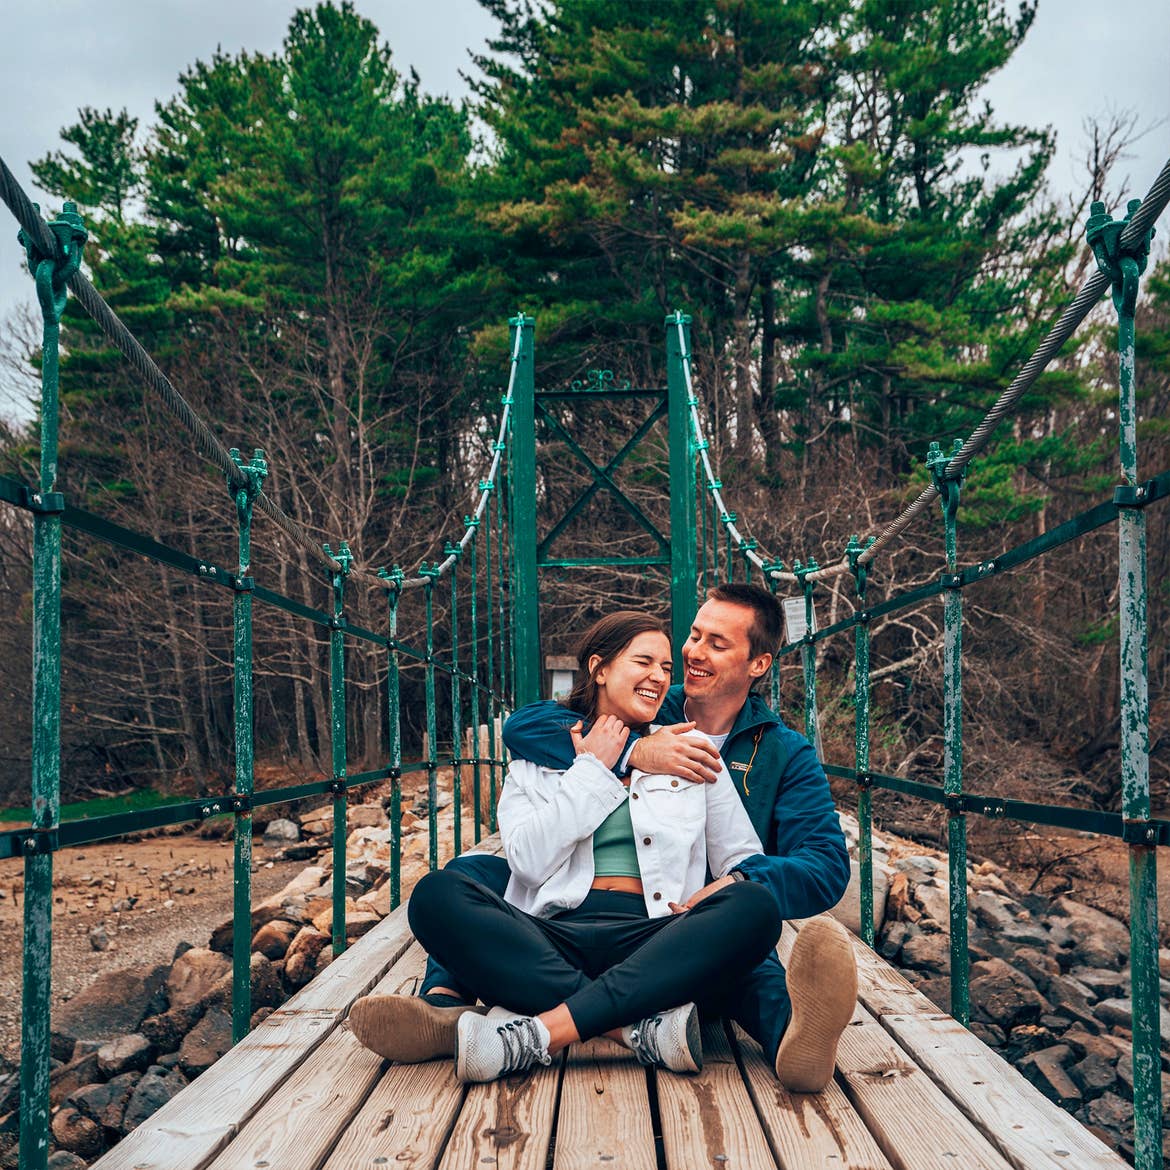 A man wearing a dark hoodie embraces a woman in a white jacket and black leggings as they sit on a suspension bridge surrounded by green trees.